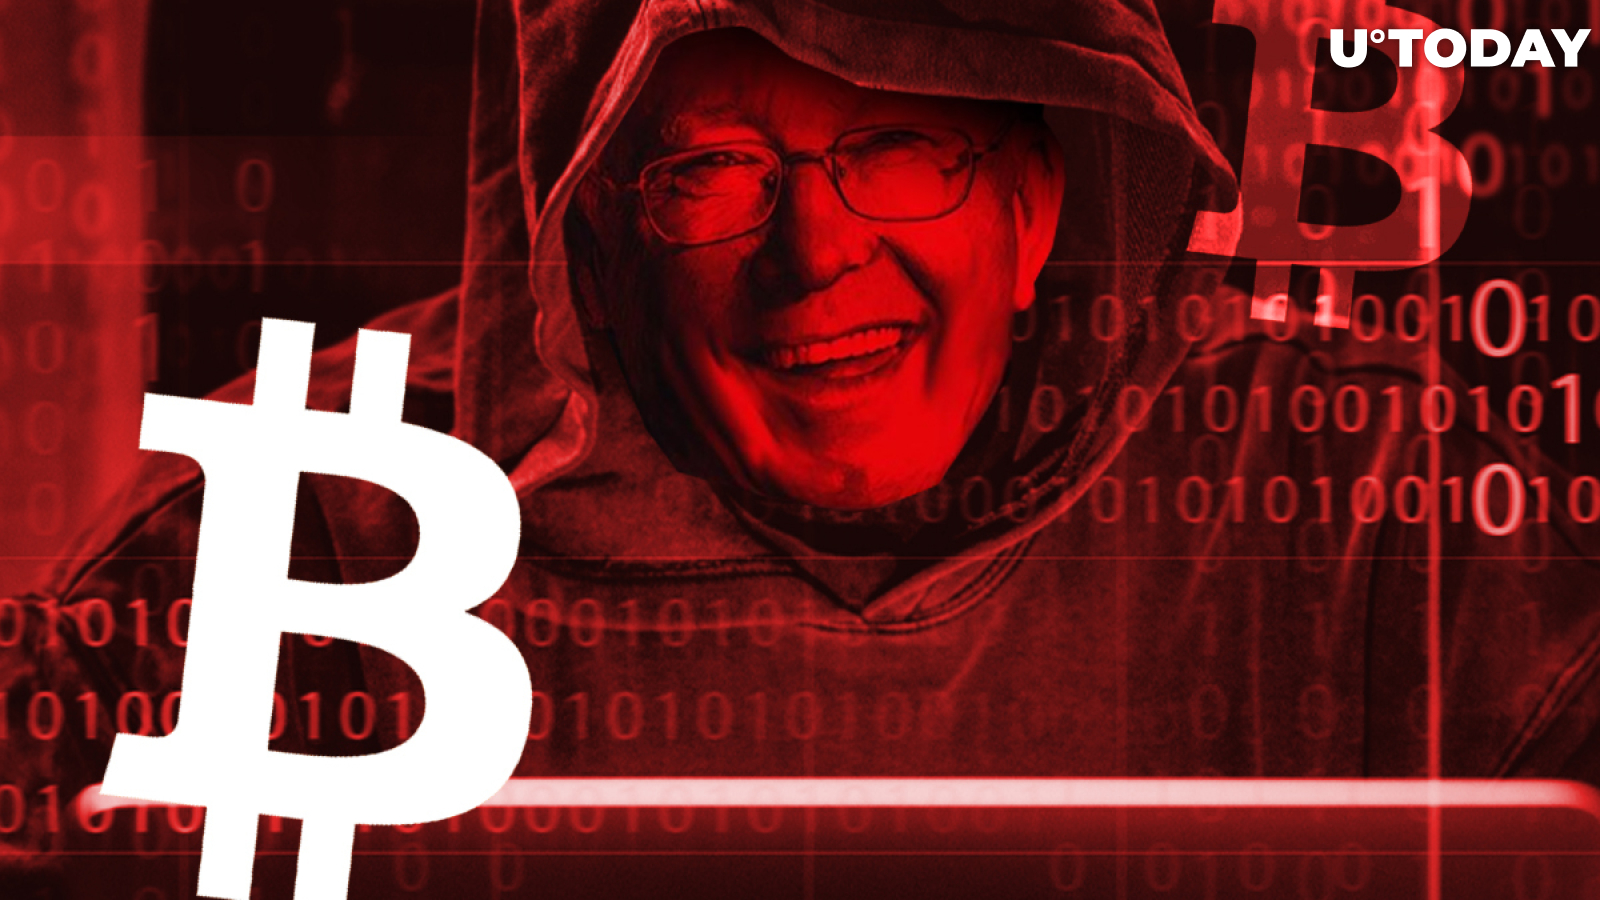 Alex Ferguson Becomes Part of Bitcoin Scam That Is Too Clever to Ignore